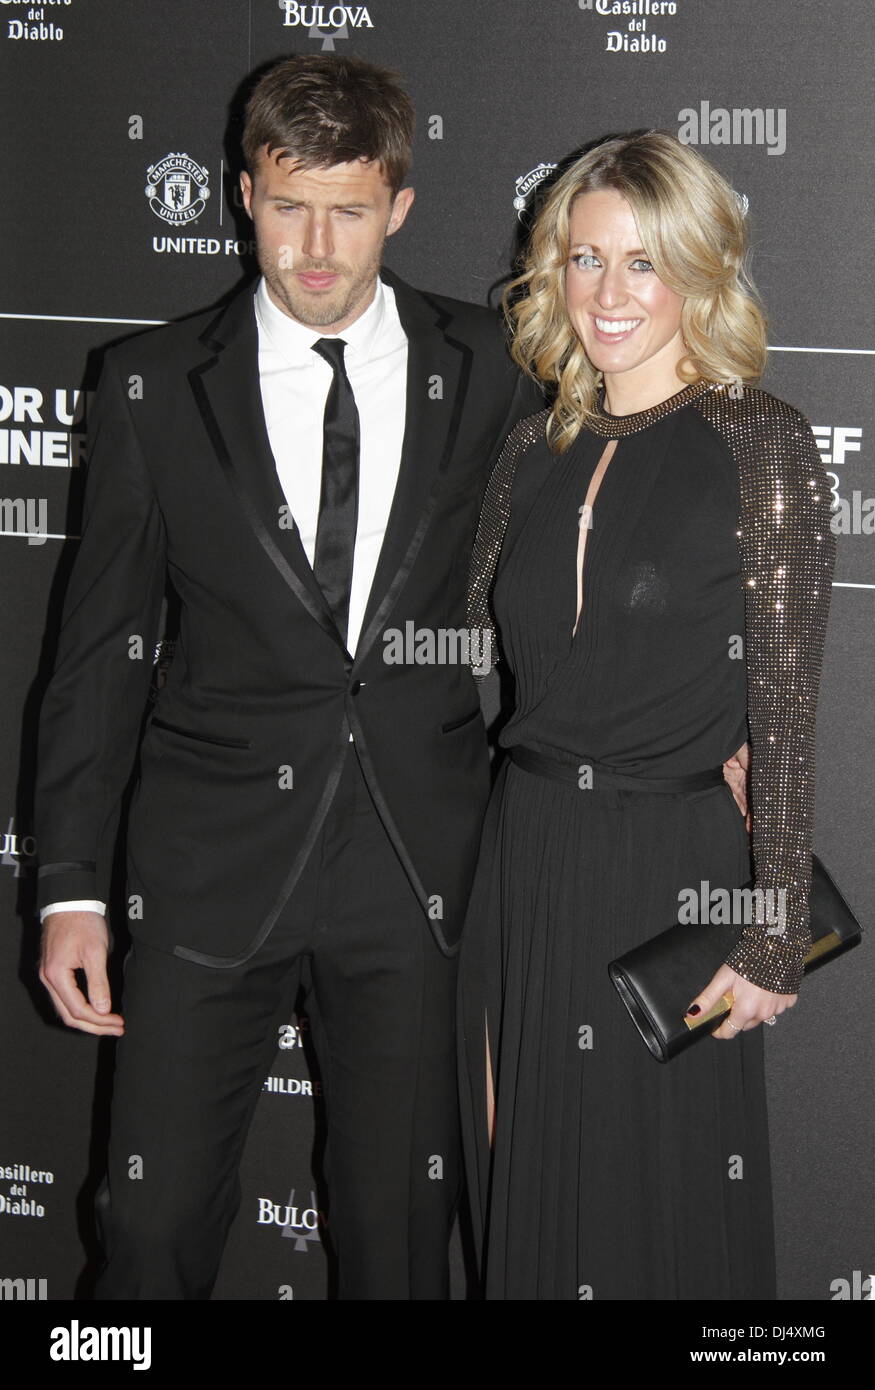 Old Trafford, Manchester, UK.  21 Nov 2013.  Michael Carrick and Lisa Carrick - Arrivals at the United for UNICEF Gala Dinner attended by the full Manchester United first-team and celebrities.  The dinner celebrated 14 years of the partnership between Manchester United and UNICEF, the worldÕs leading childrenÕs organisation, and raised over £200,000 for its work for vulnerable children around the world. Credit:  Deborah Vernon/Alamy Live News Stock Photo